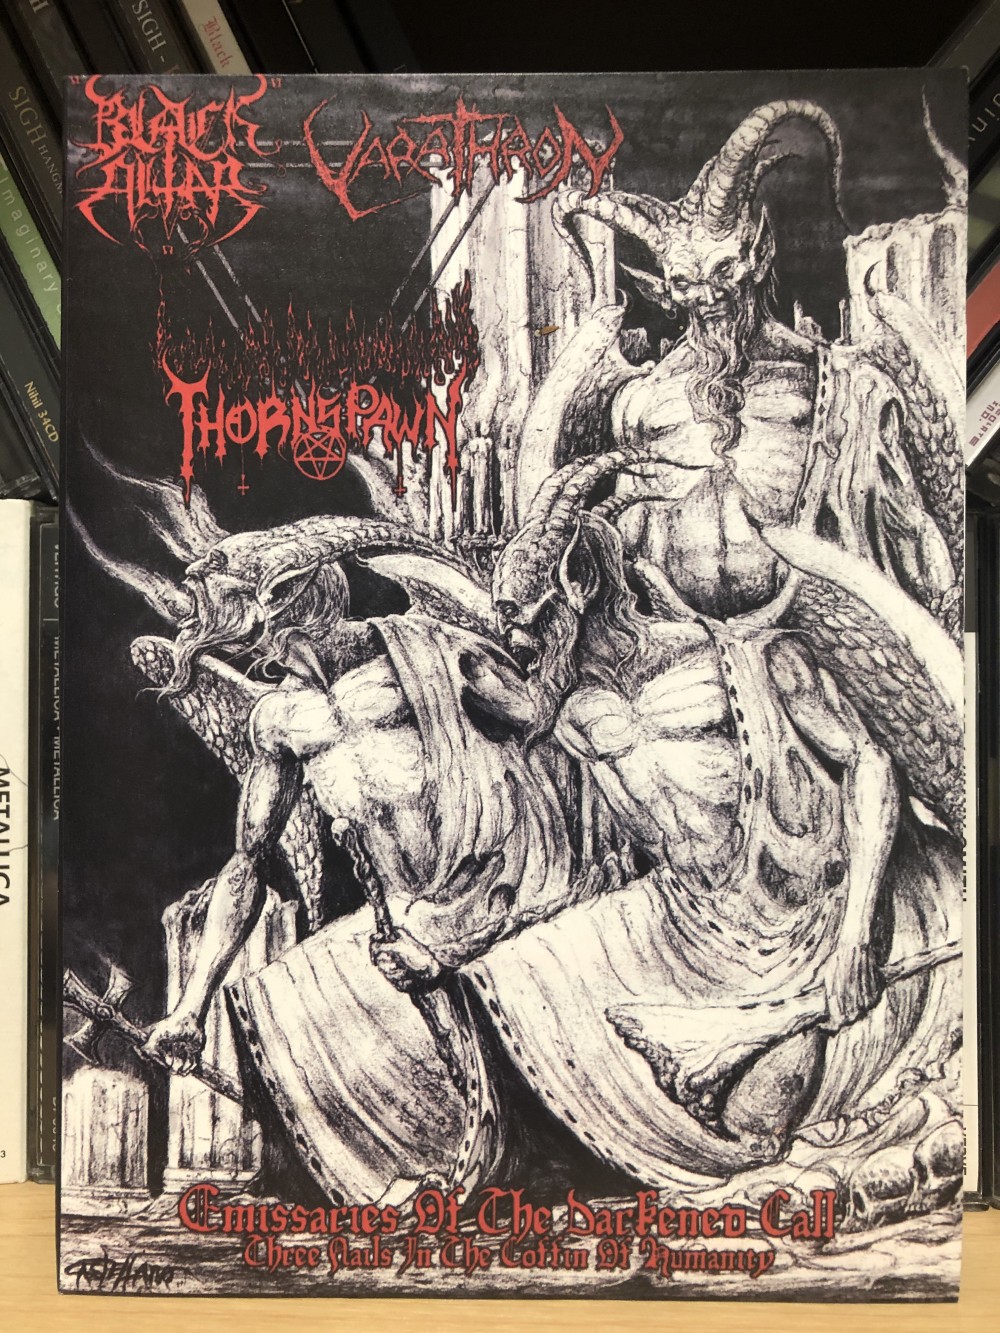 Thornspawn / Varathron / Black Altar - Emissaries of the Darkened Call - Three Nails in the Coffin of Humanity CD Photo